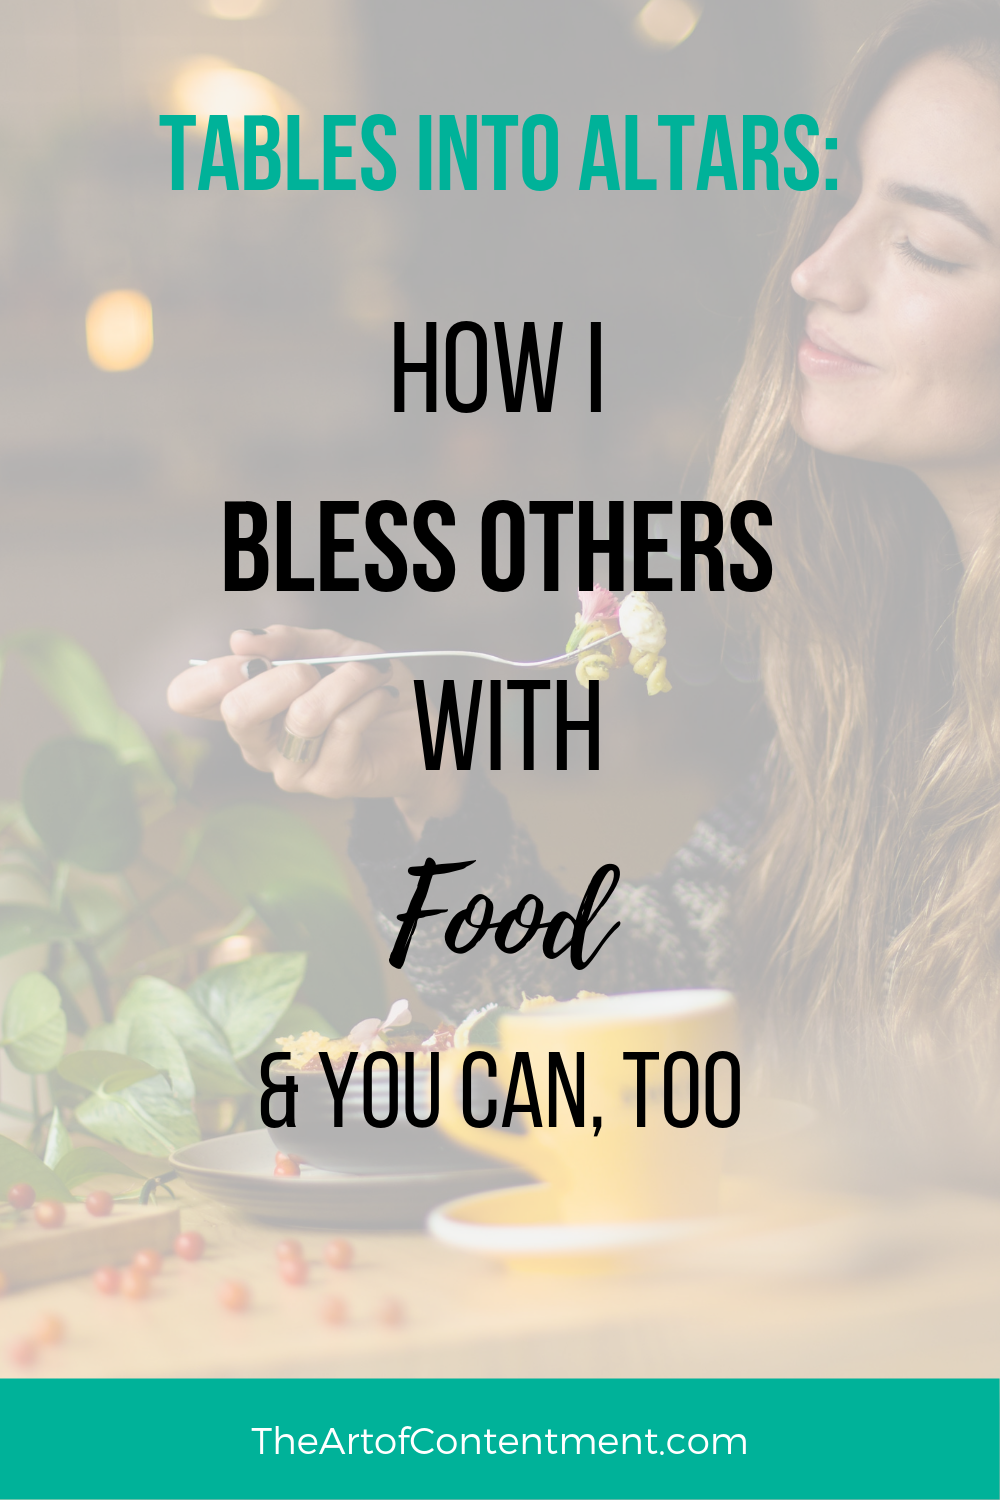 Instant Pot Ministry: Using What You Have To Bless Others